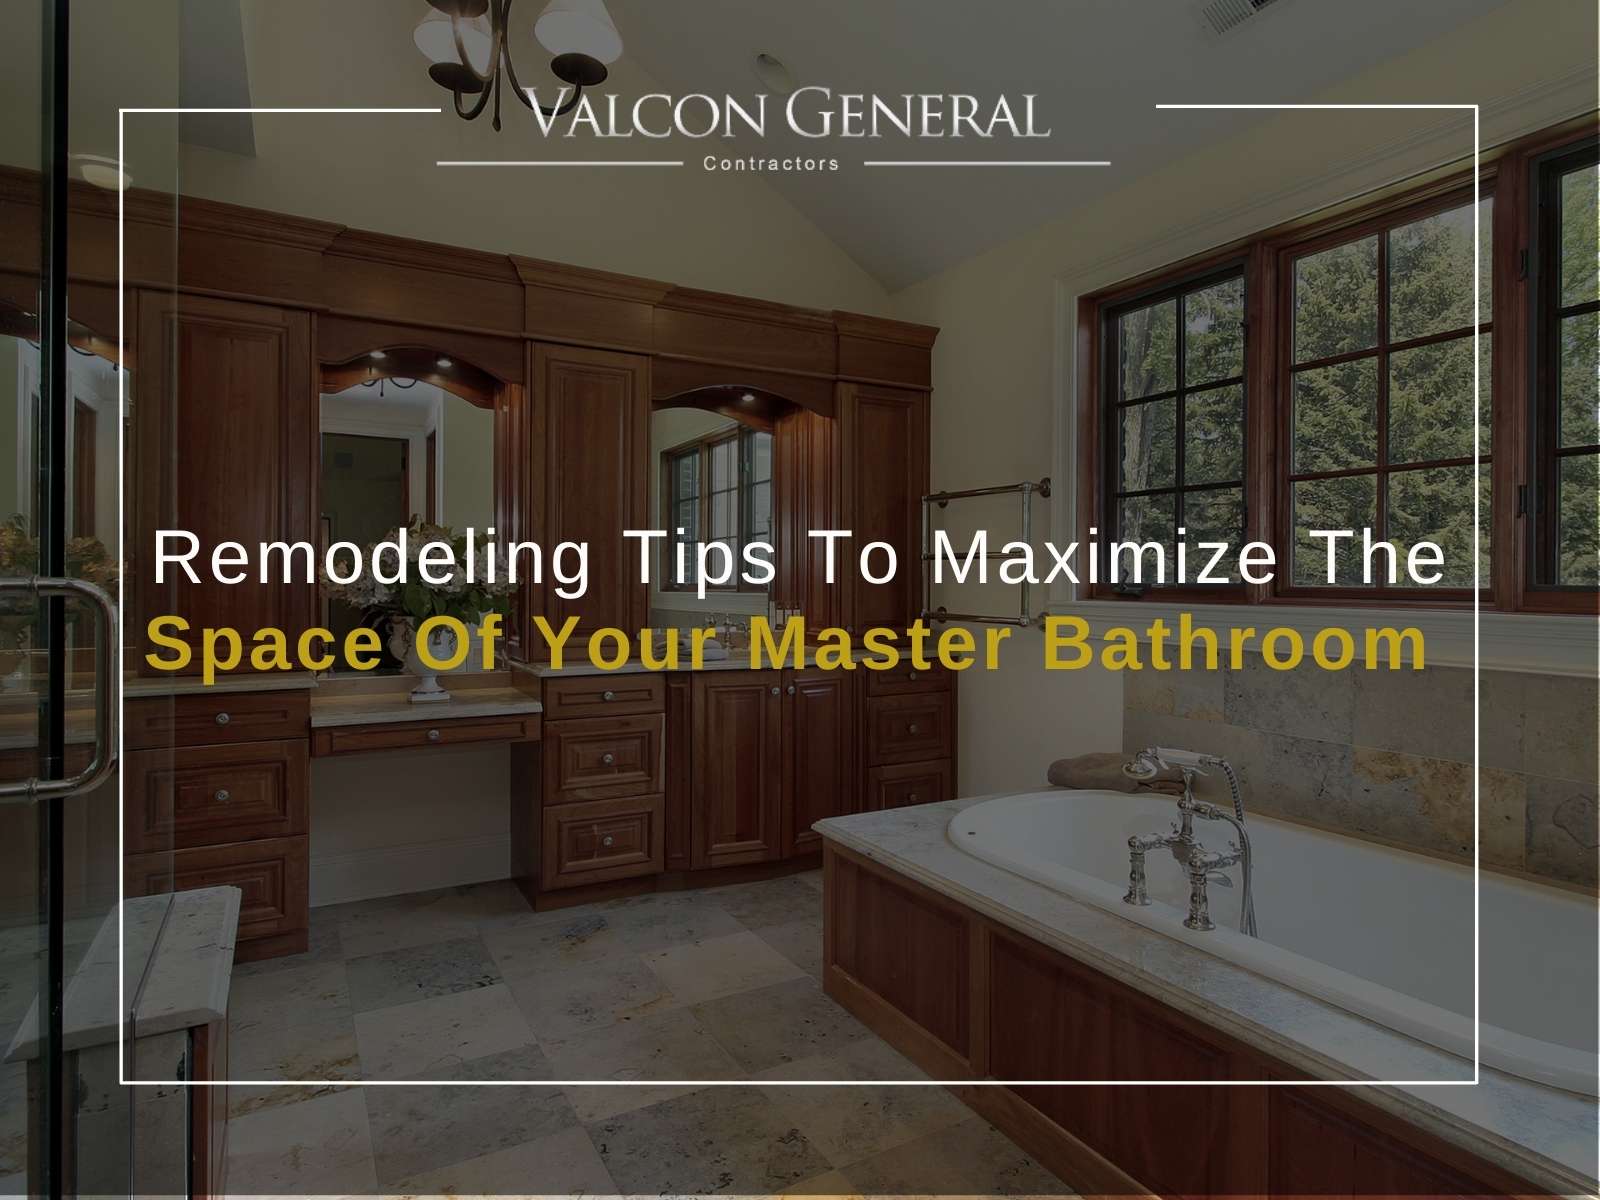 Remodeling Tips To Maximize The Space Of Your Master Bathroom